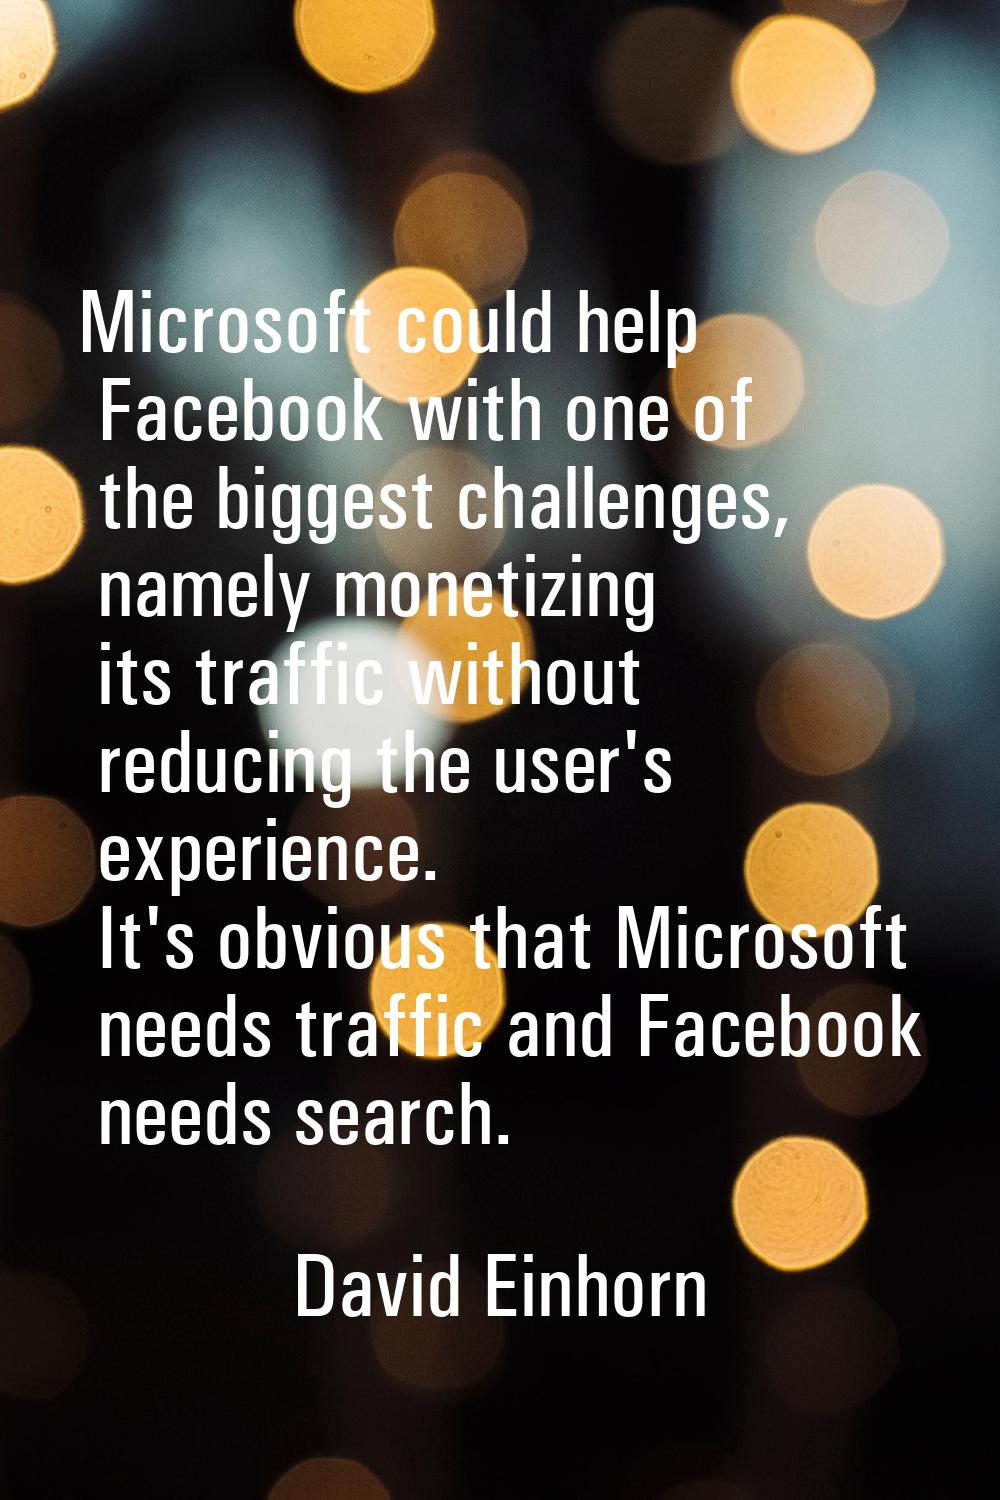 Microsoft could help Facebook with one of the biggest challenges, namely monetizing its traffic wit